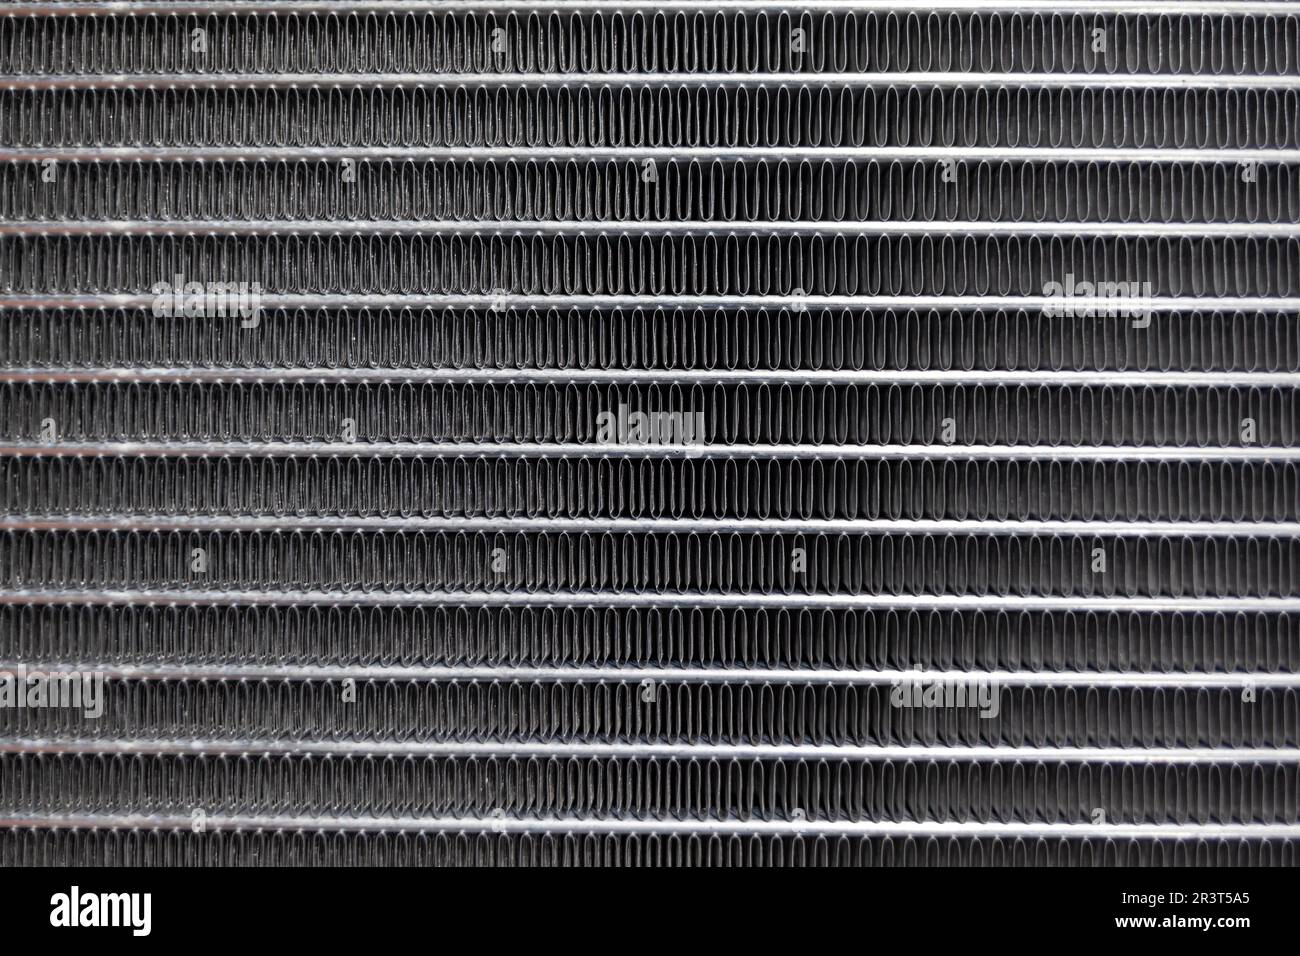 Texture of a car radiator. Engine cooler background. Vintage style. Radiator grille for car interior heater air conditioner, close-up. Radiator repair Stock Photo